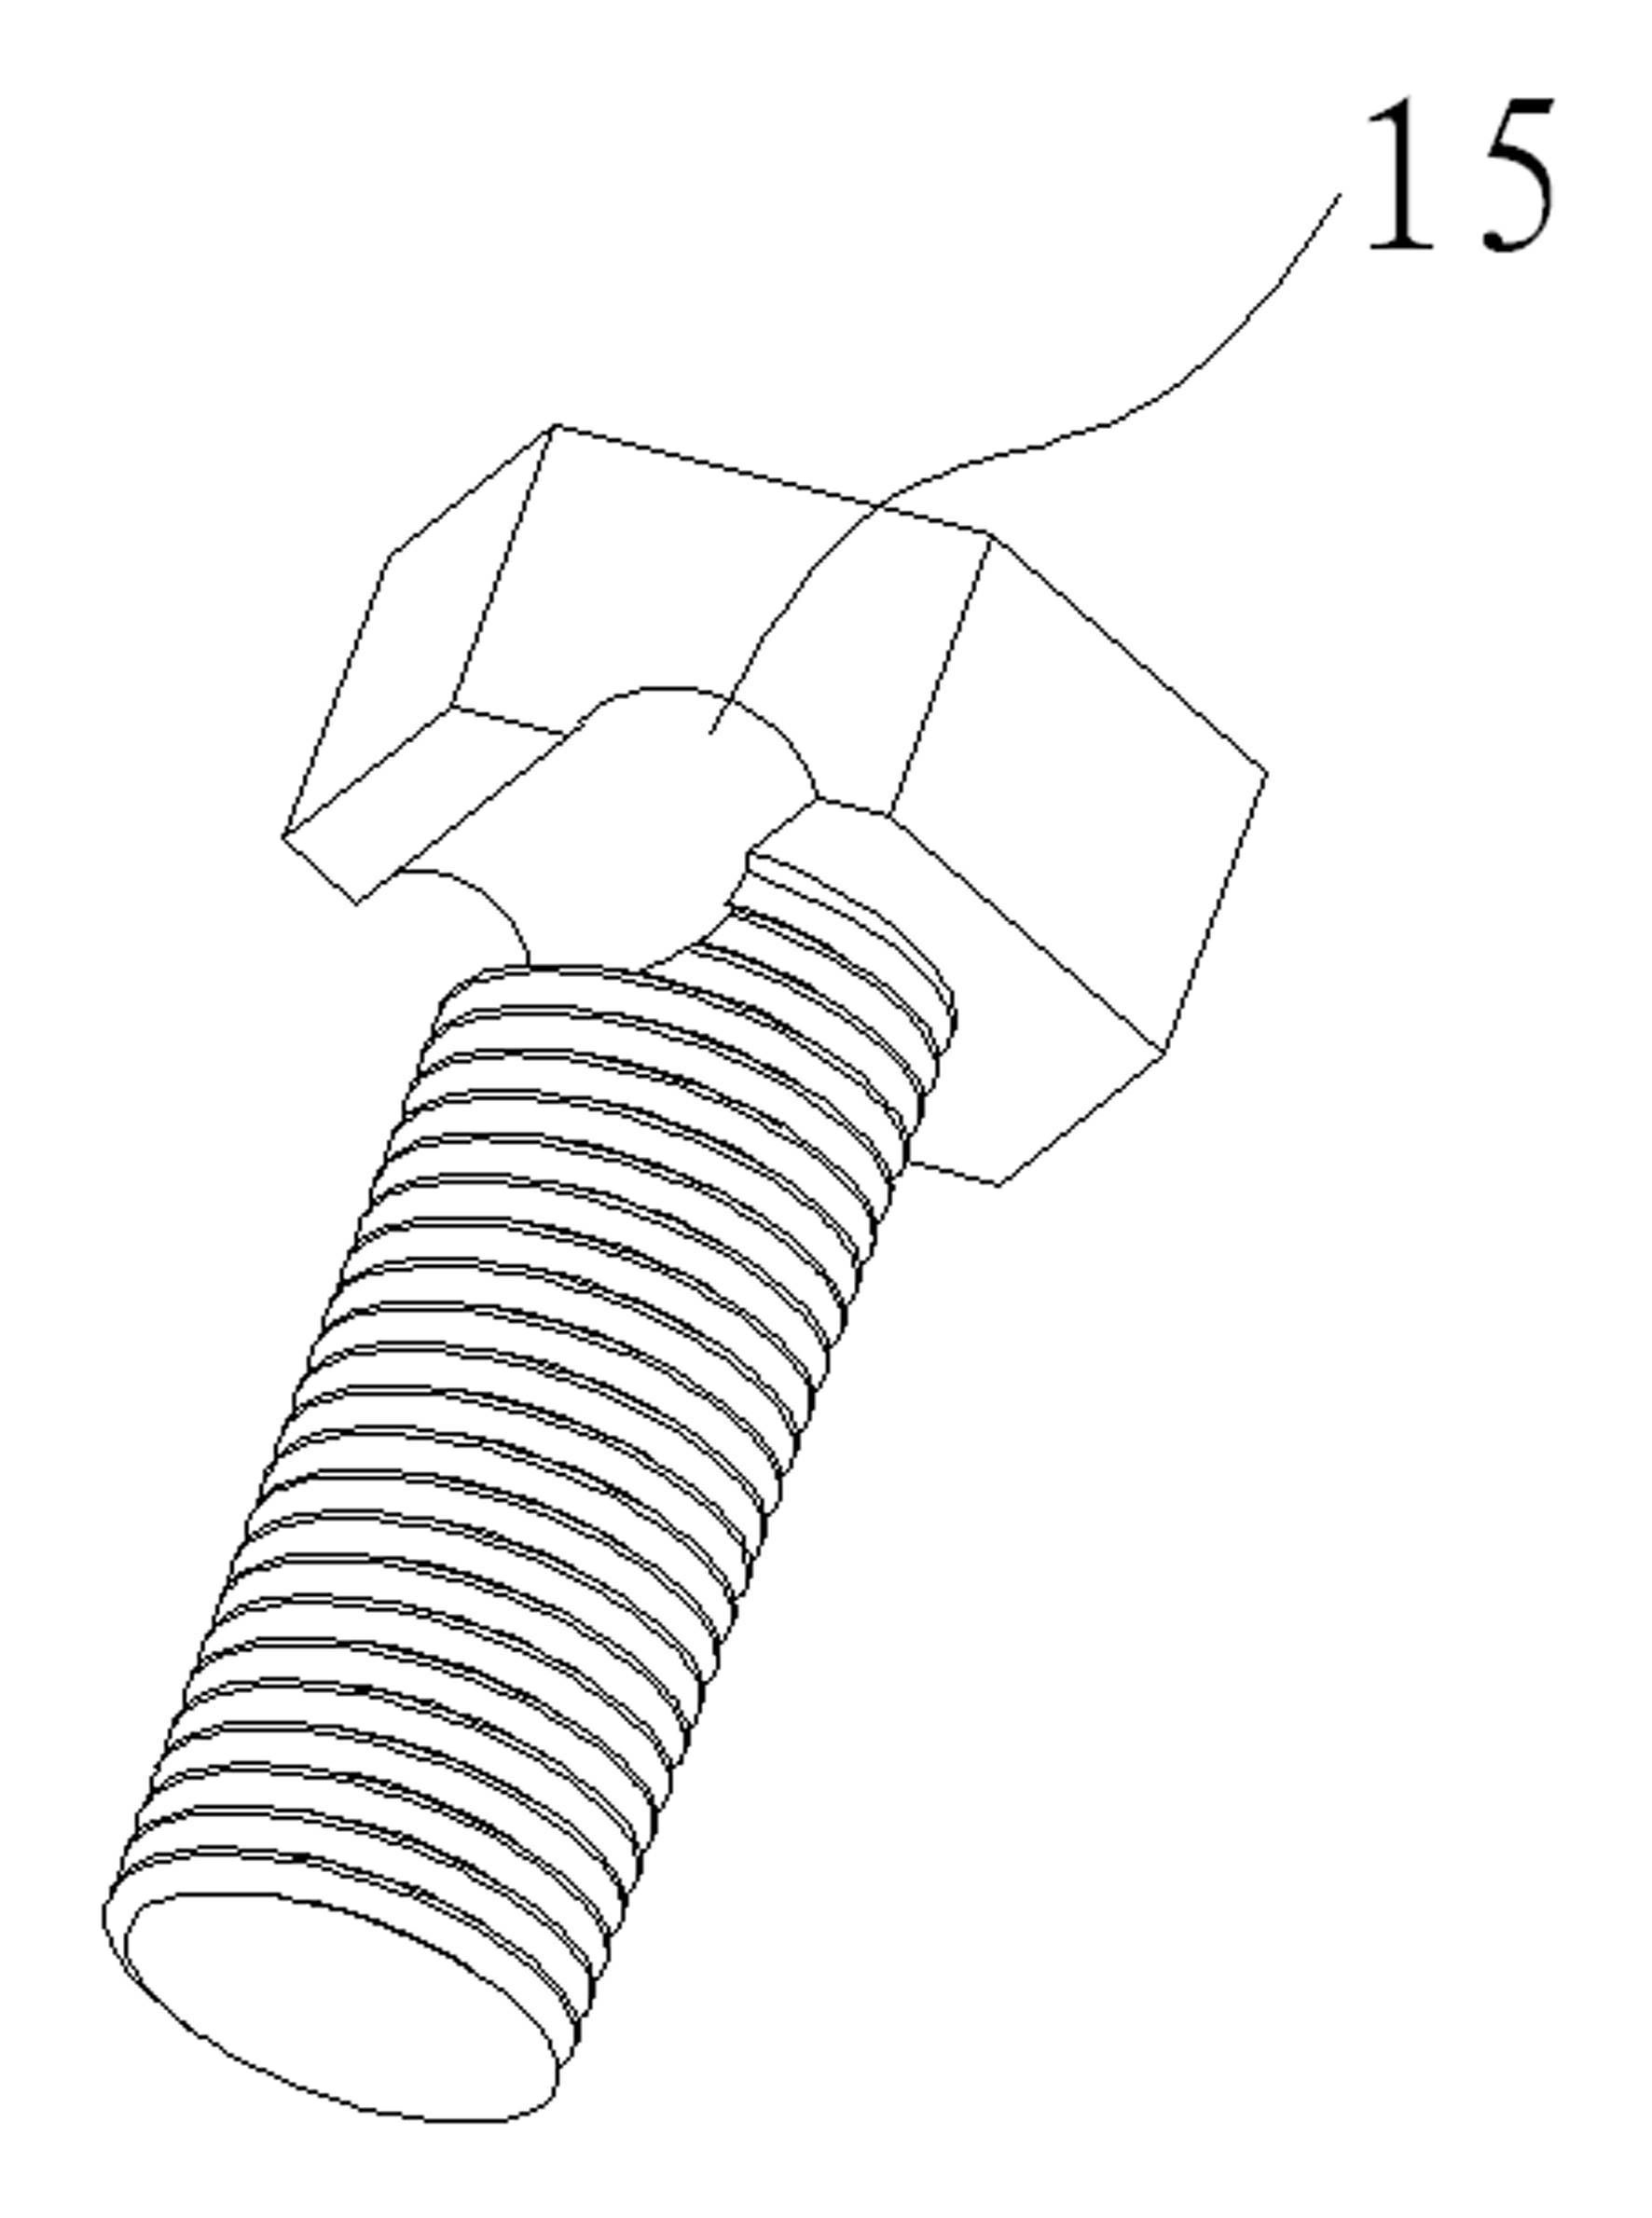 Combined three-dimensional traction mounting bracket for wrist joint